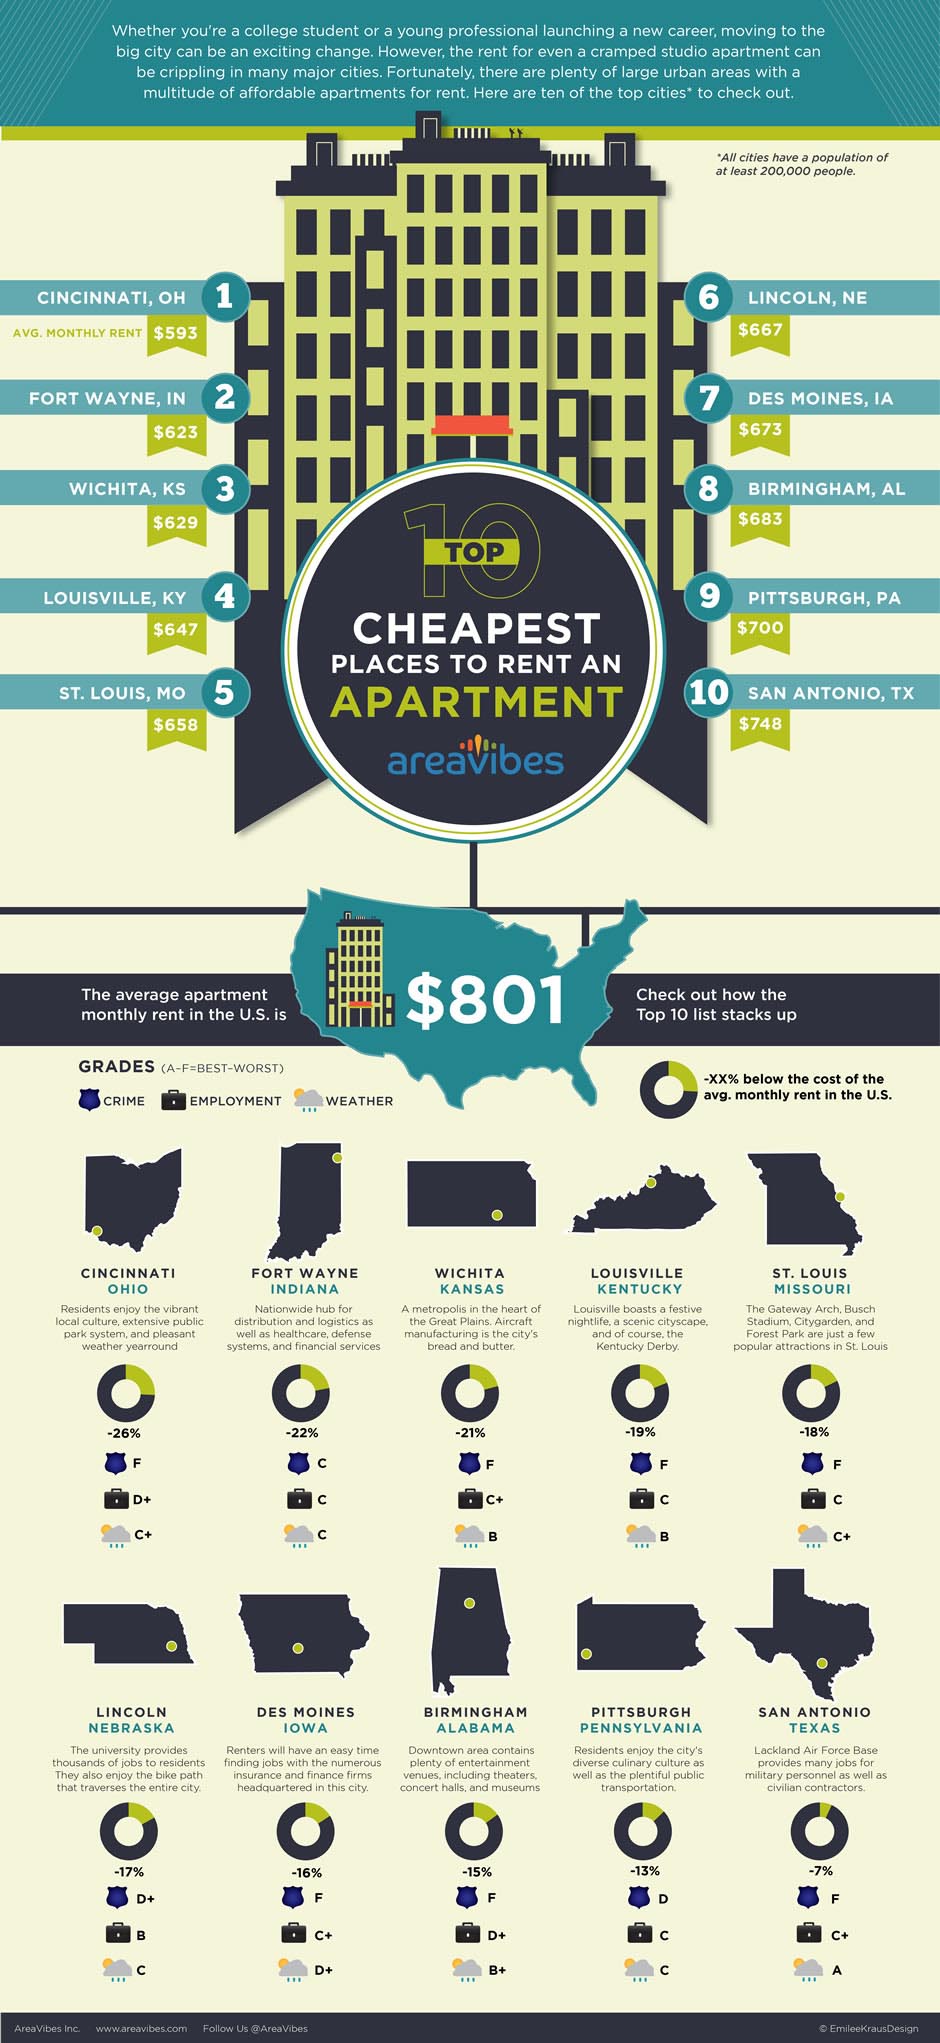 Top 10 Cheapest Cities For Apartments Infographic